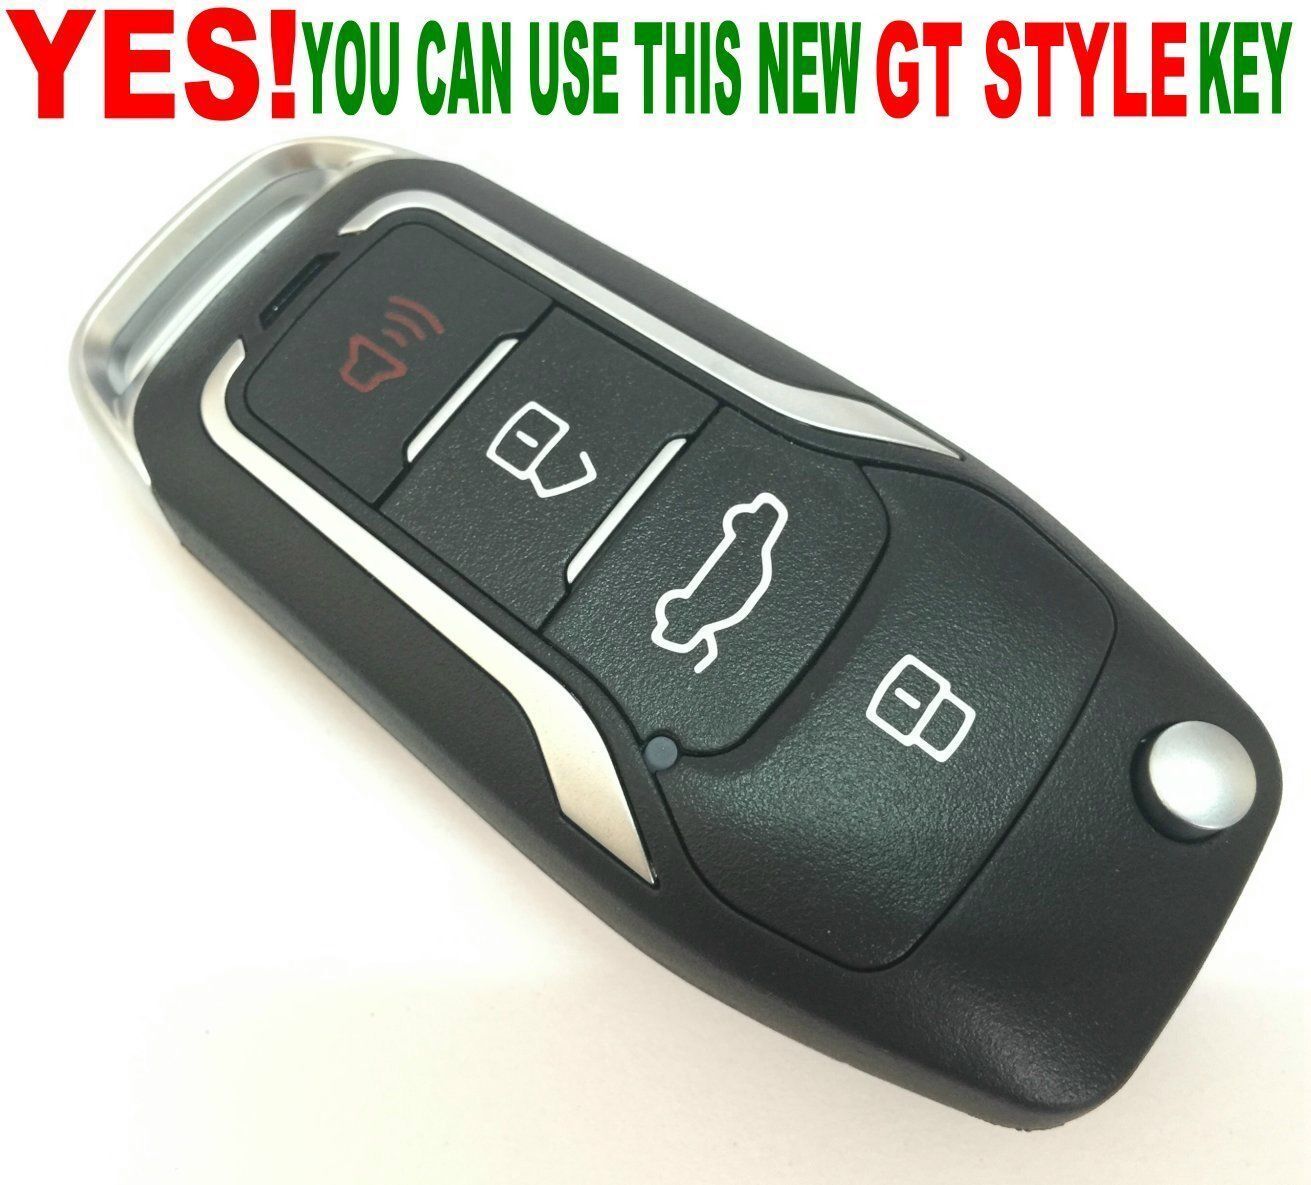 GT STYLE FLIP KEY REMOTE FOR HUMMER H3 H3T ALARM CLICKER BEEPER IGNITION FOB